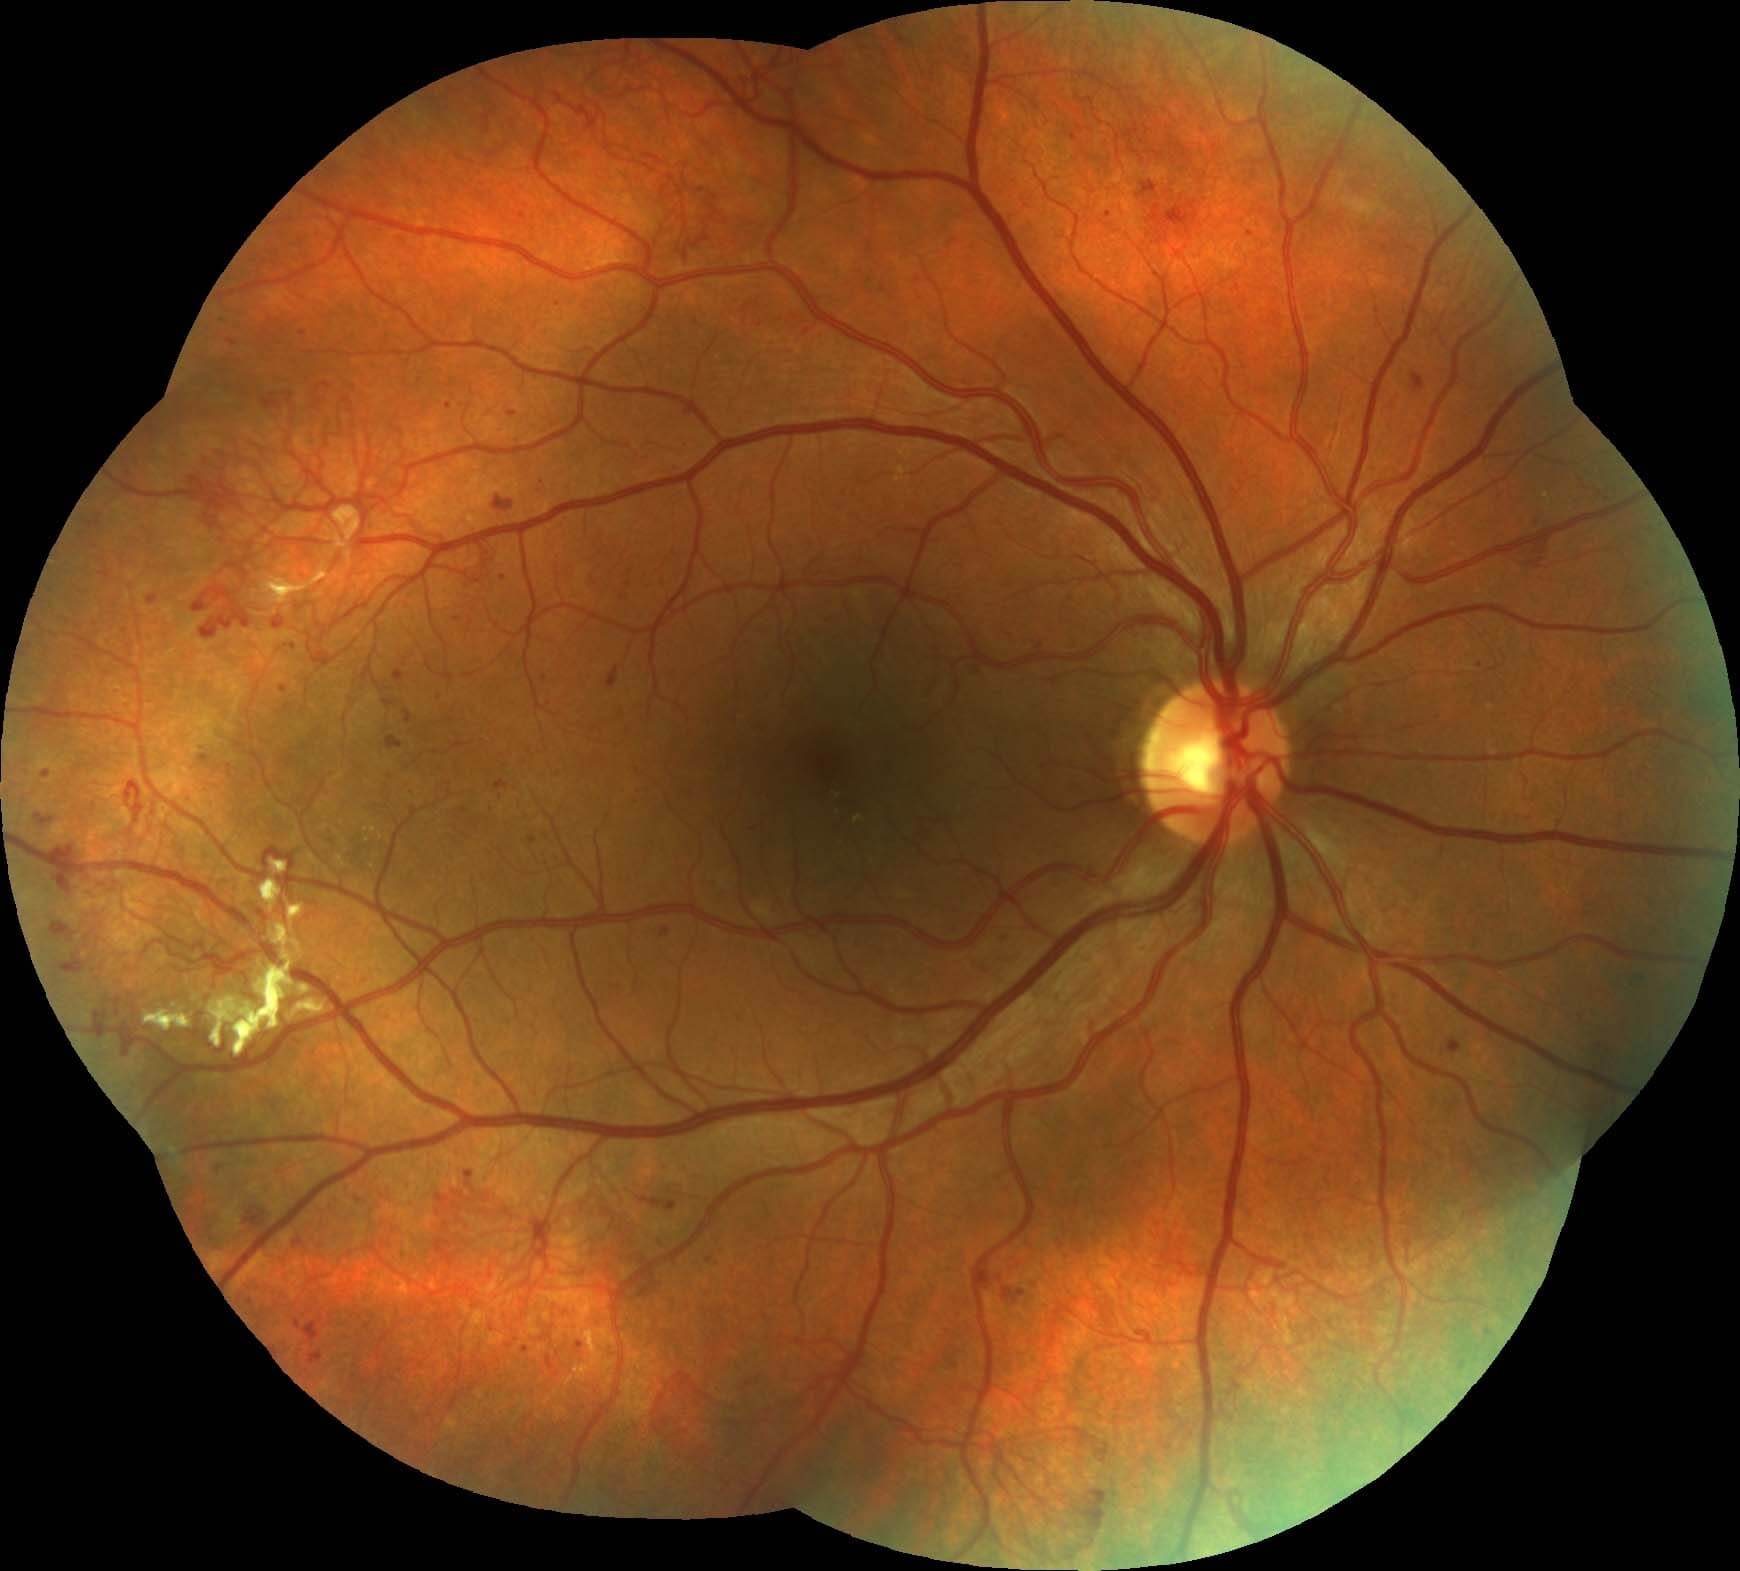 Right colour photography demonstrates neovascularization elsewhere and preretinal fibrosis.